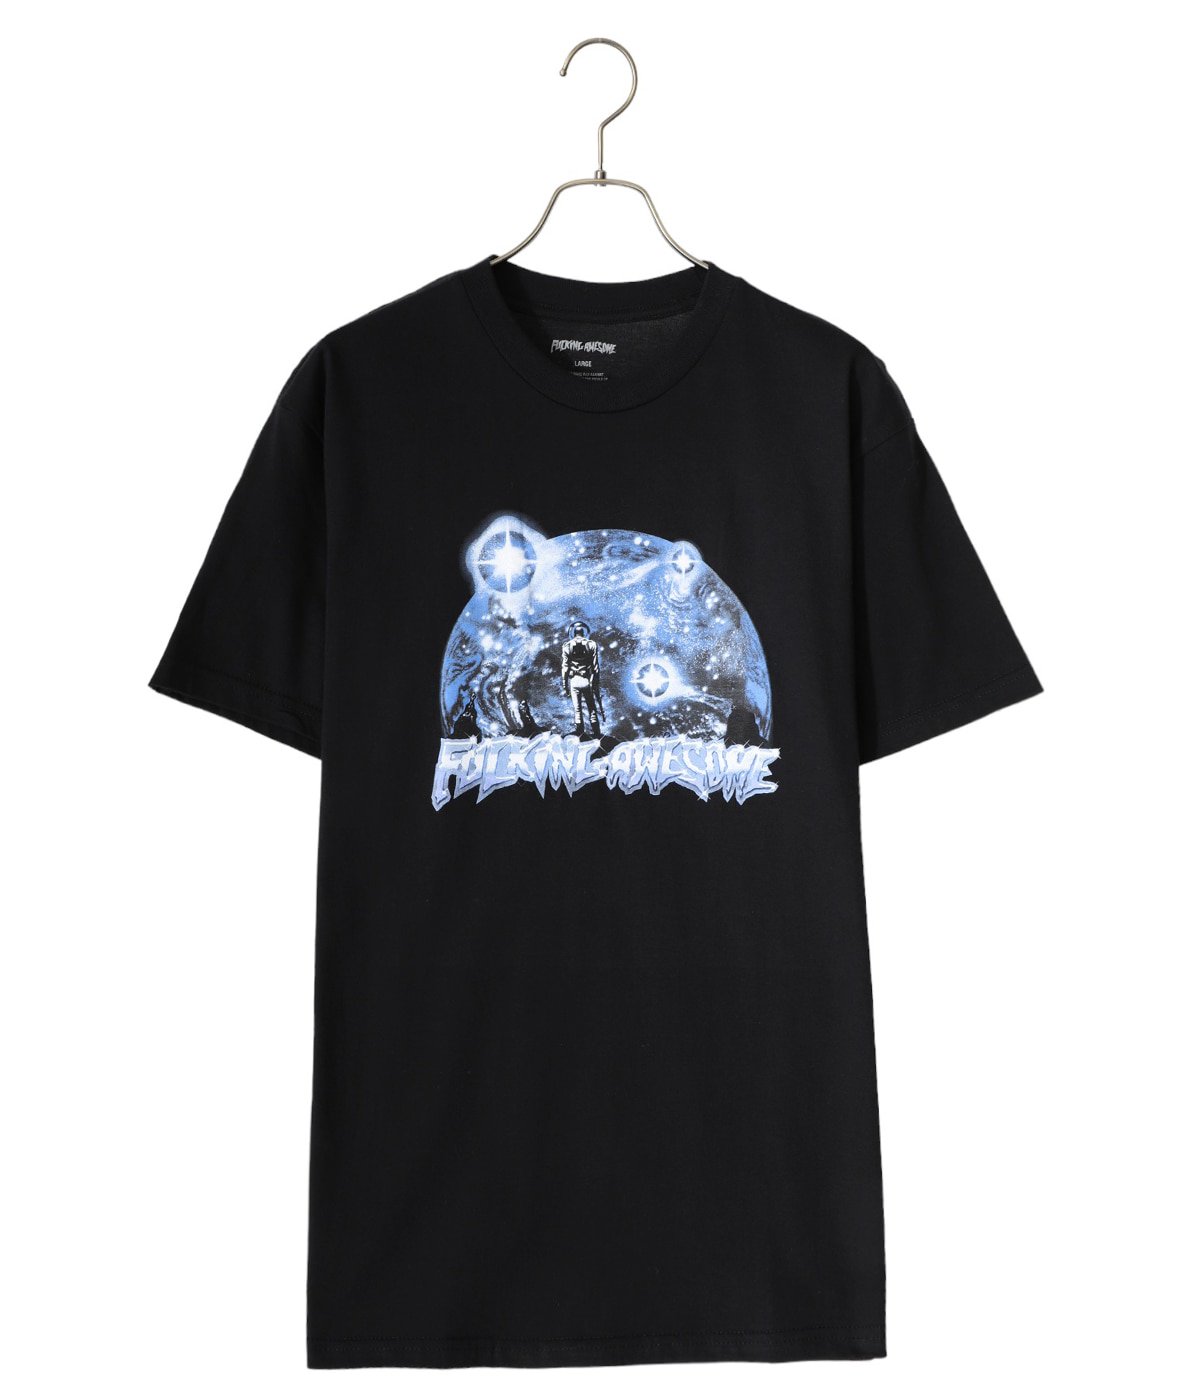 Space Man Tee | FUCKING AWESOME(ファッキンオーサム) / トップス 